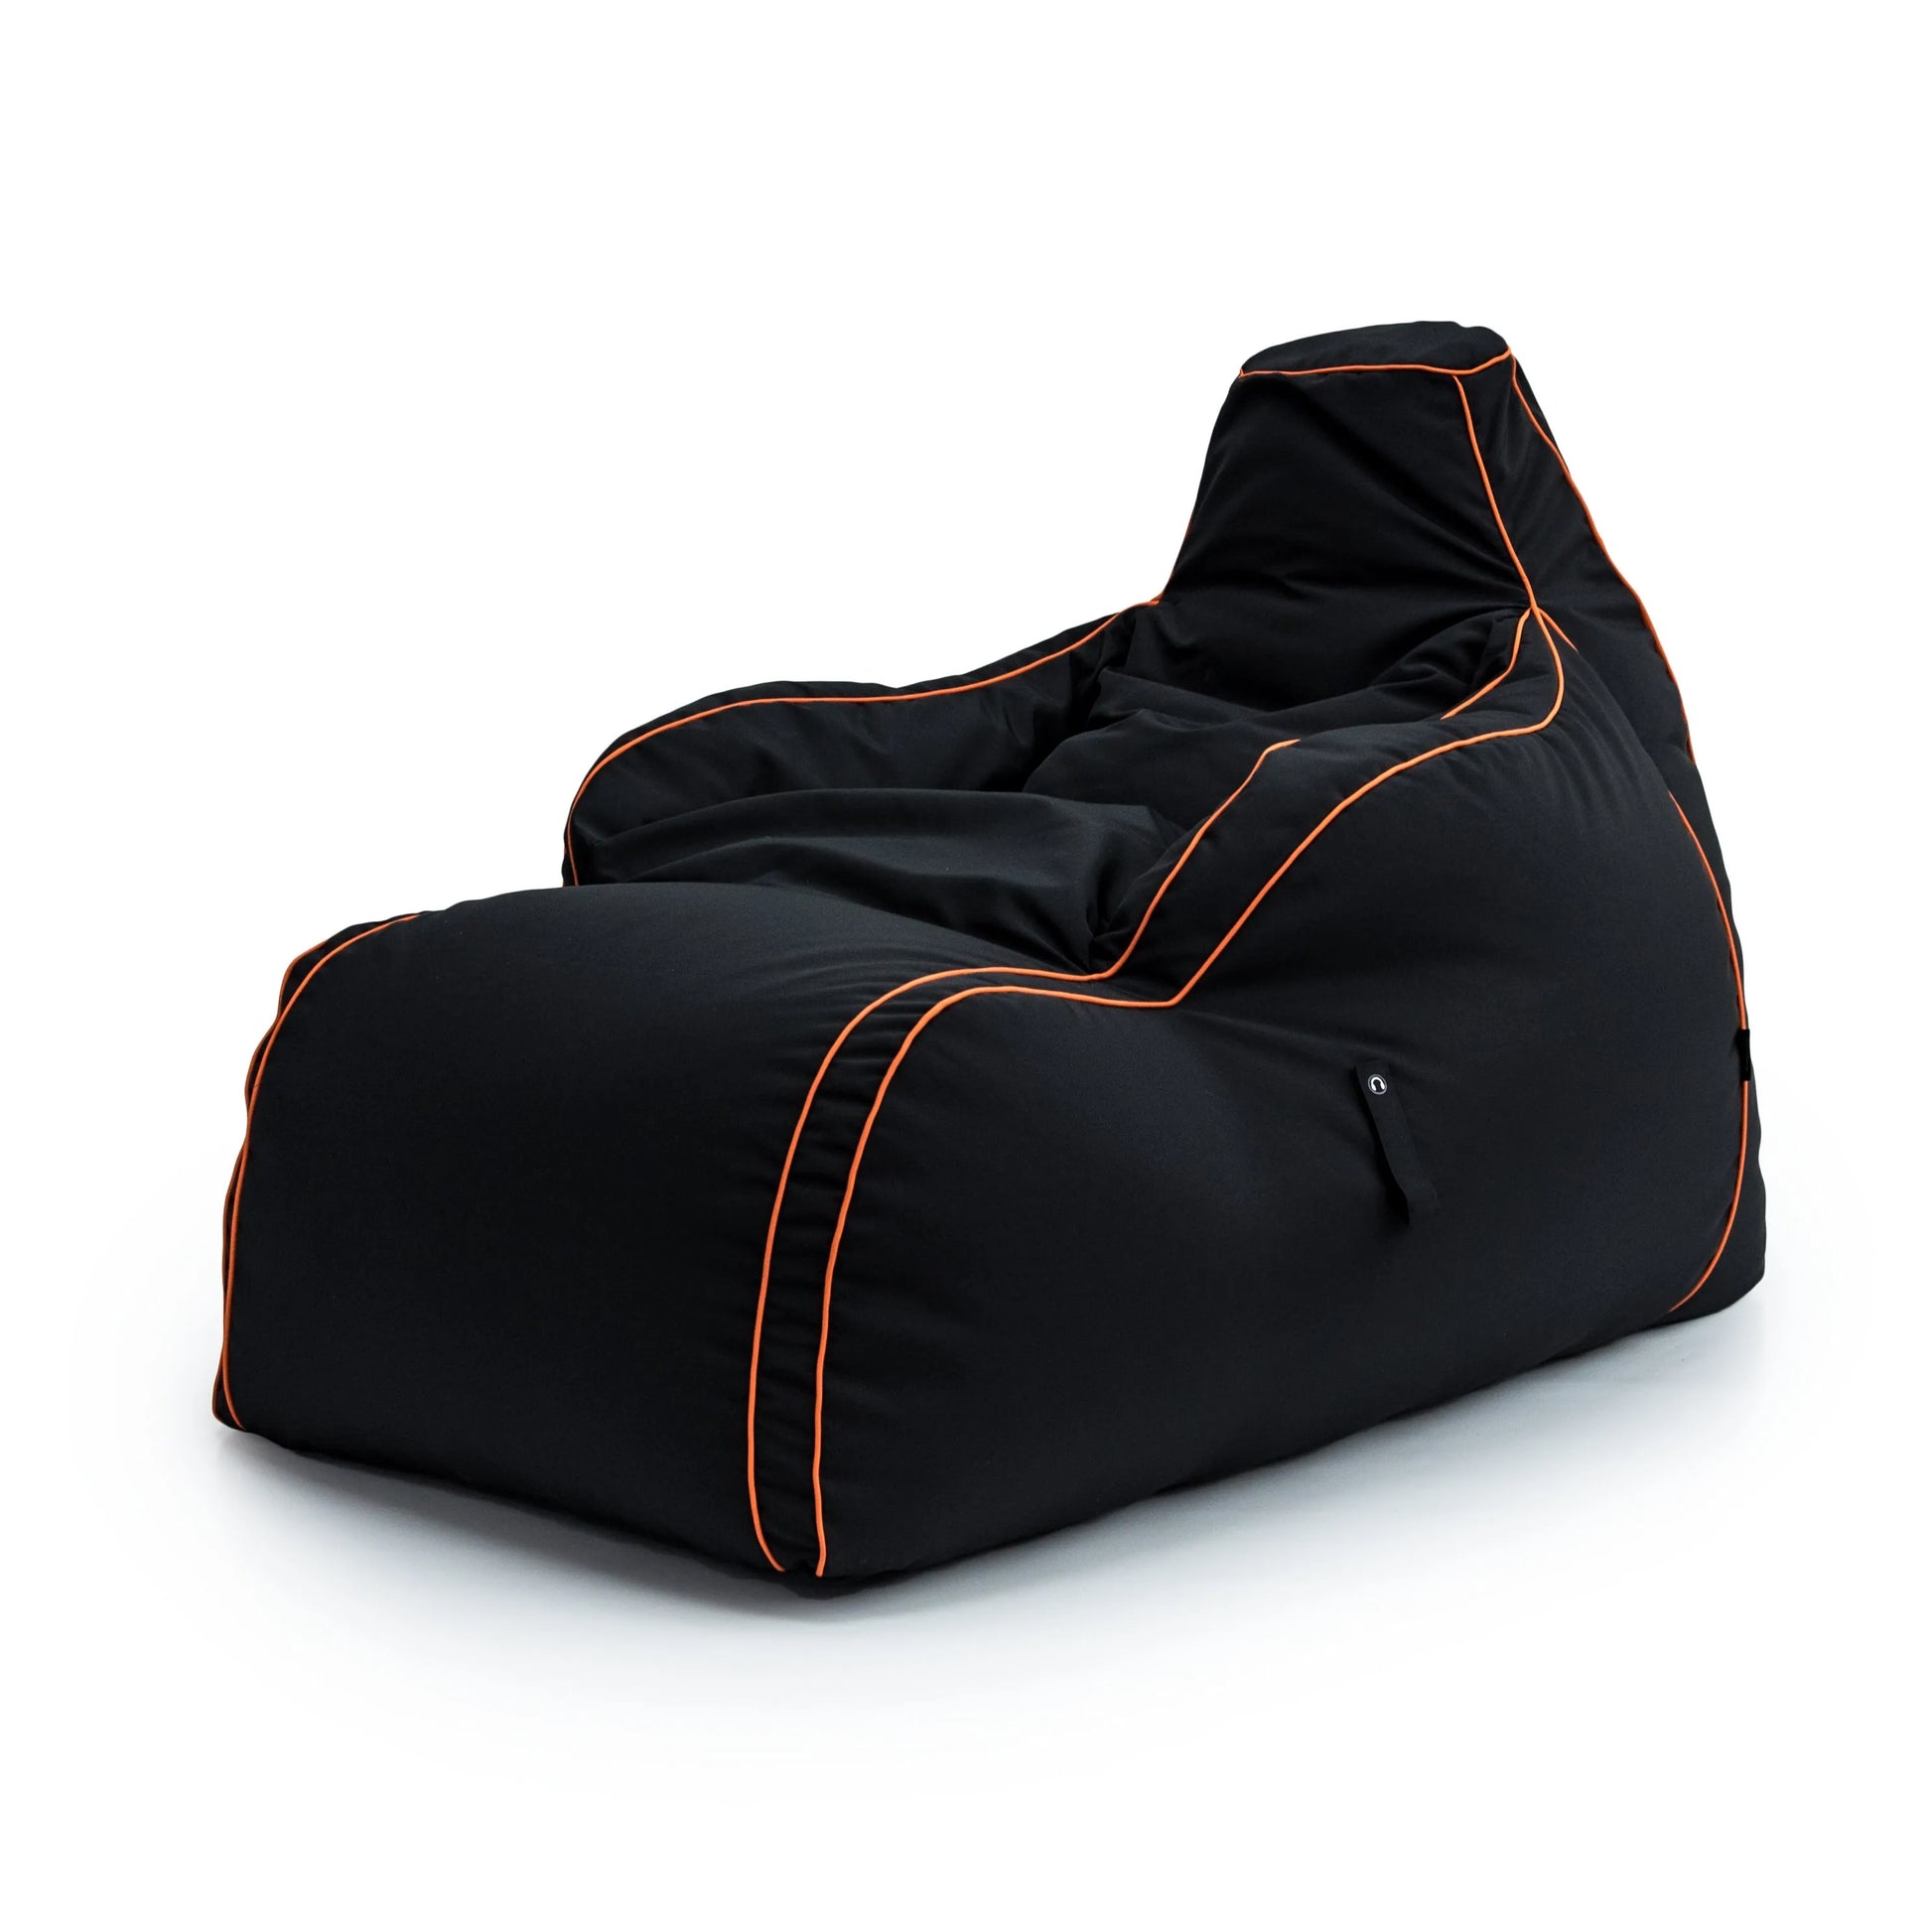 A black bean bag chair with orange trim and a headphone holder sits on a white background.